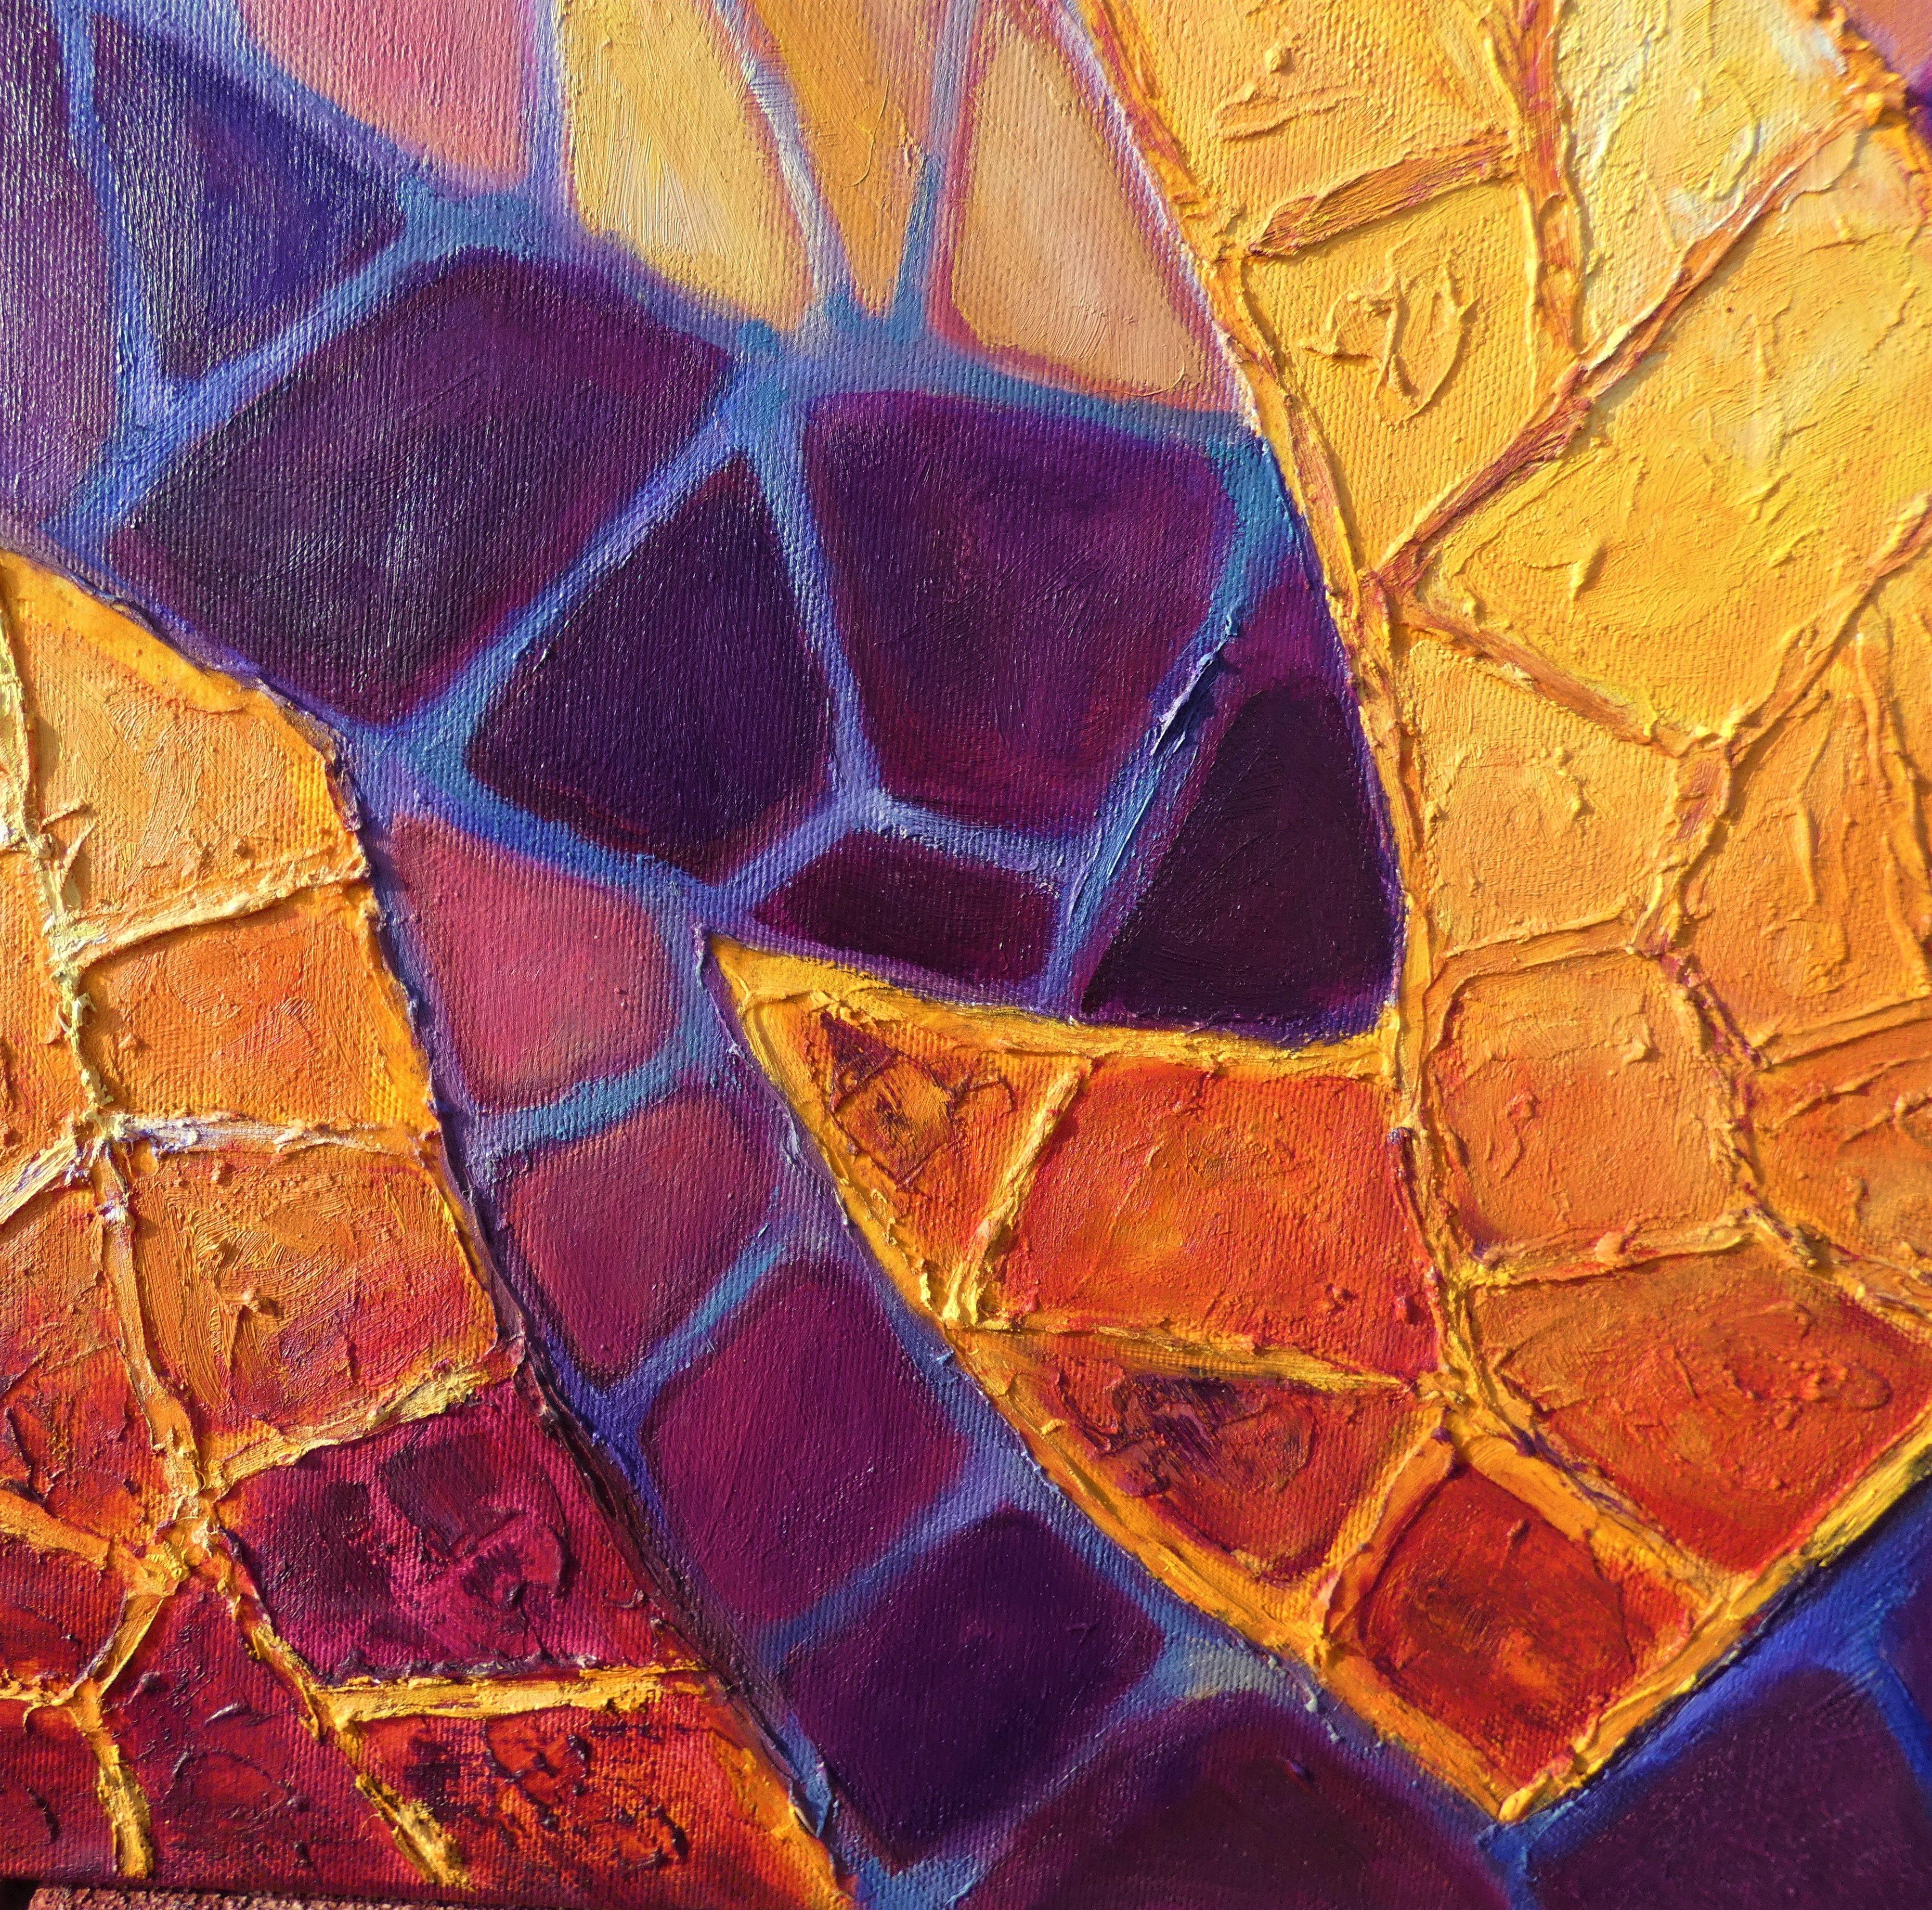 Intuitiv Structures II, Painting, Oil on Canvas - Orange Abstract Painting by Felicia Trales